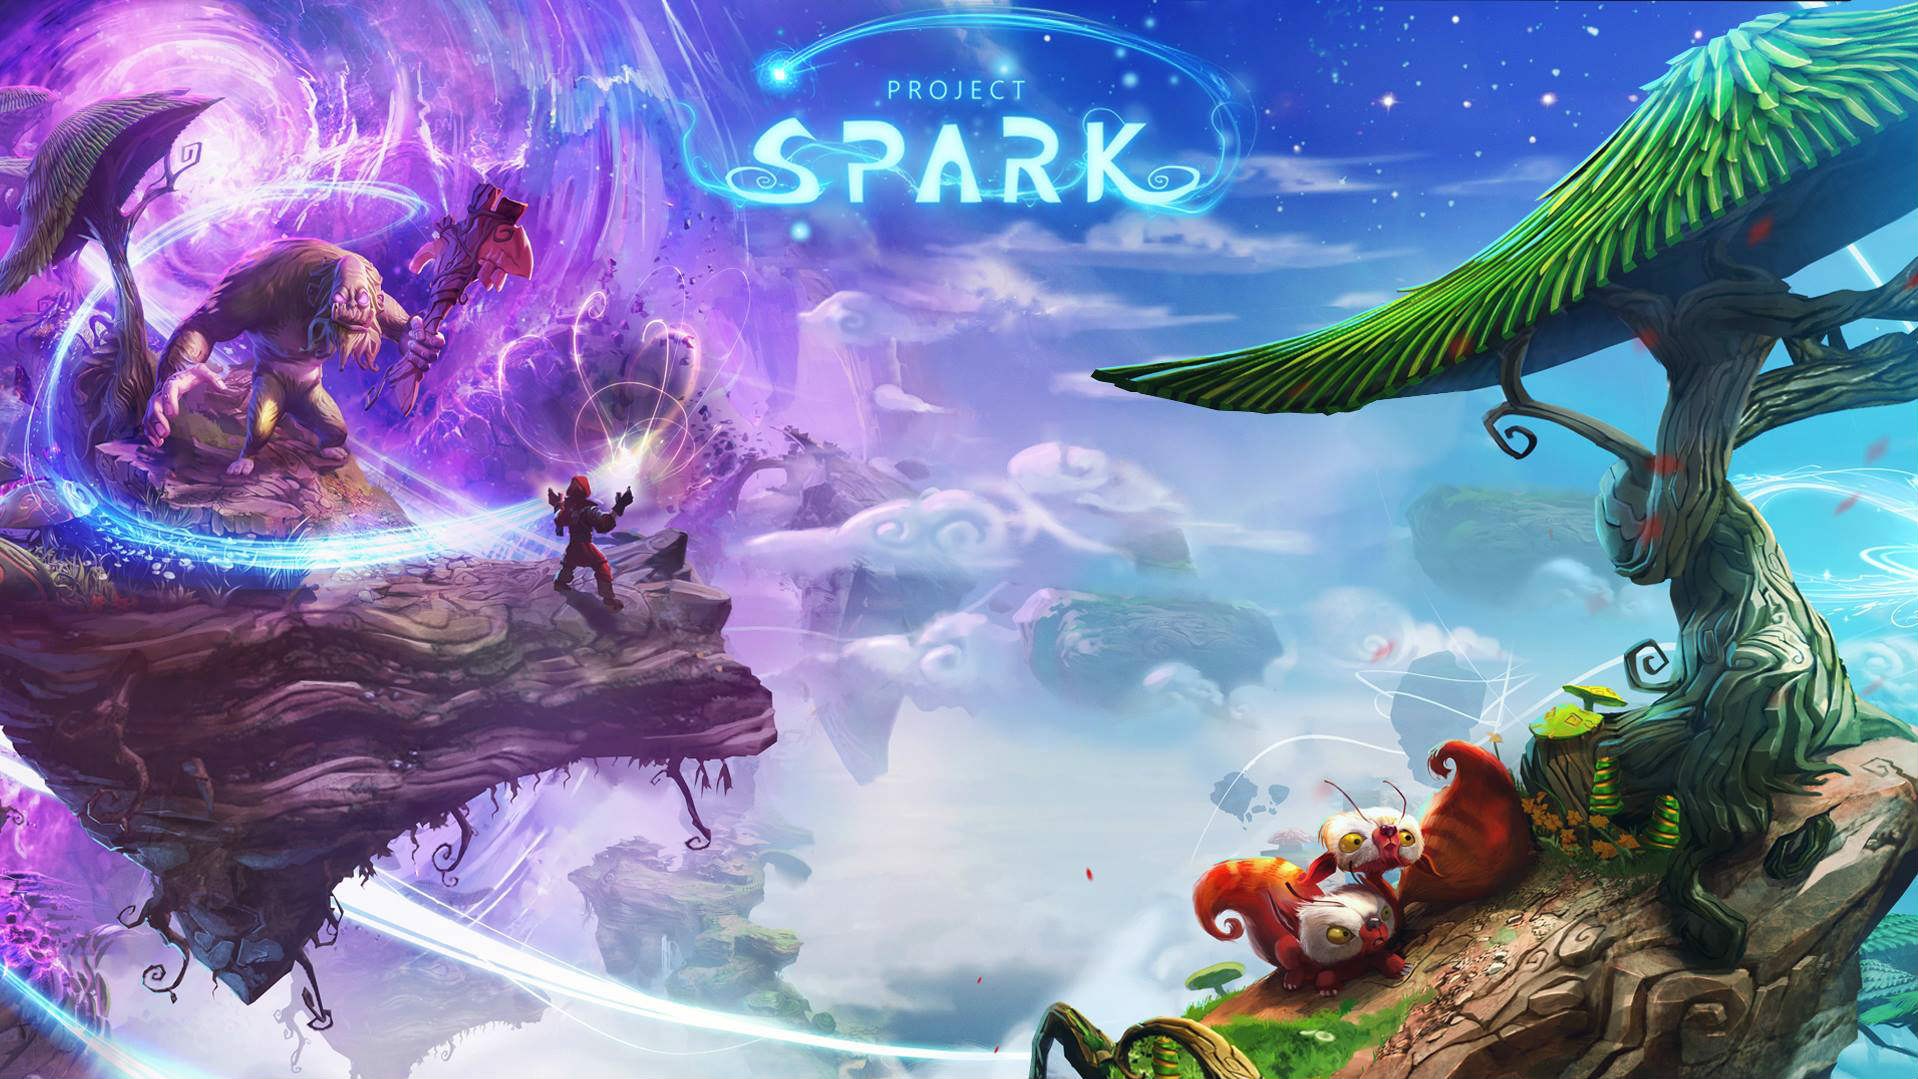 toan-bo-dlc-cua-project-spark-duoc-phat-hanh-mien-phi